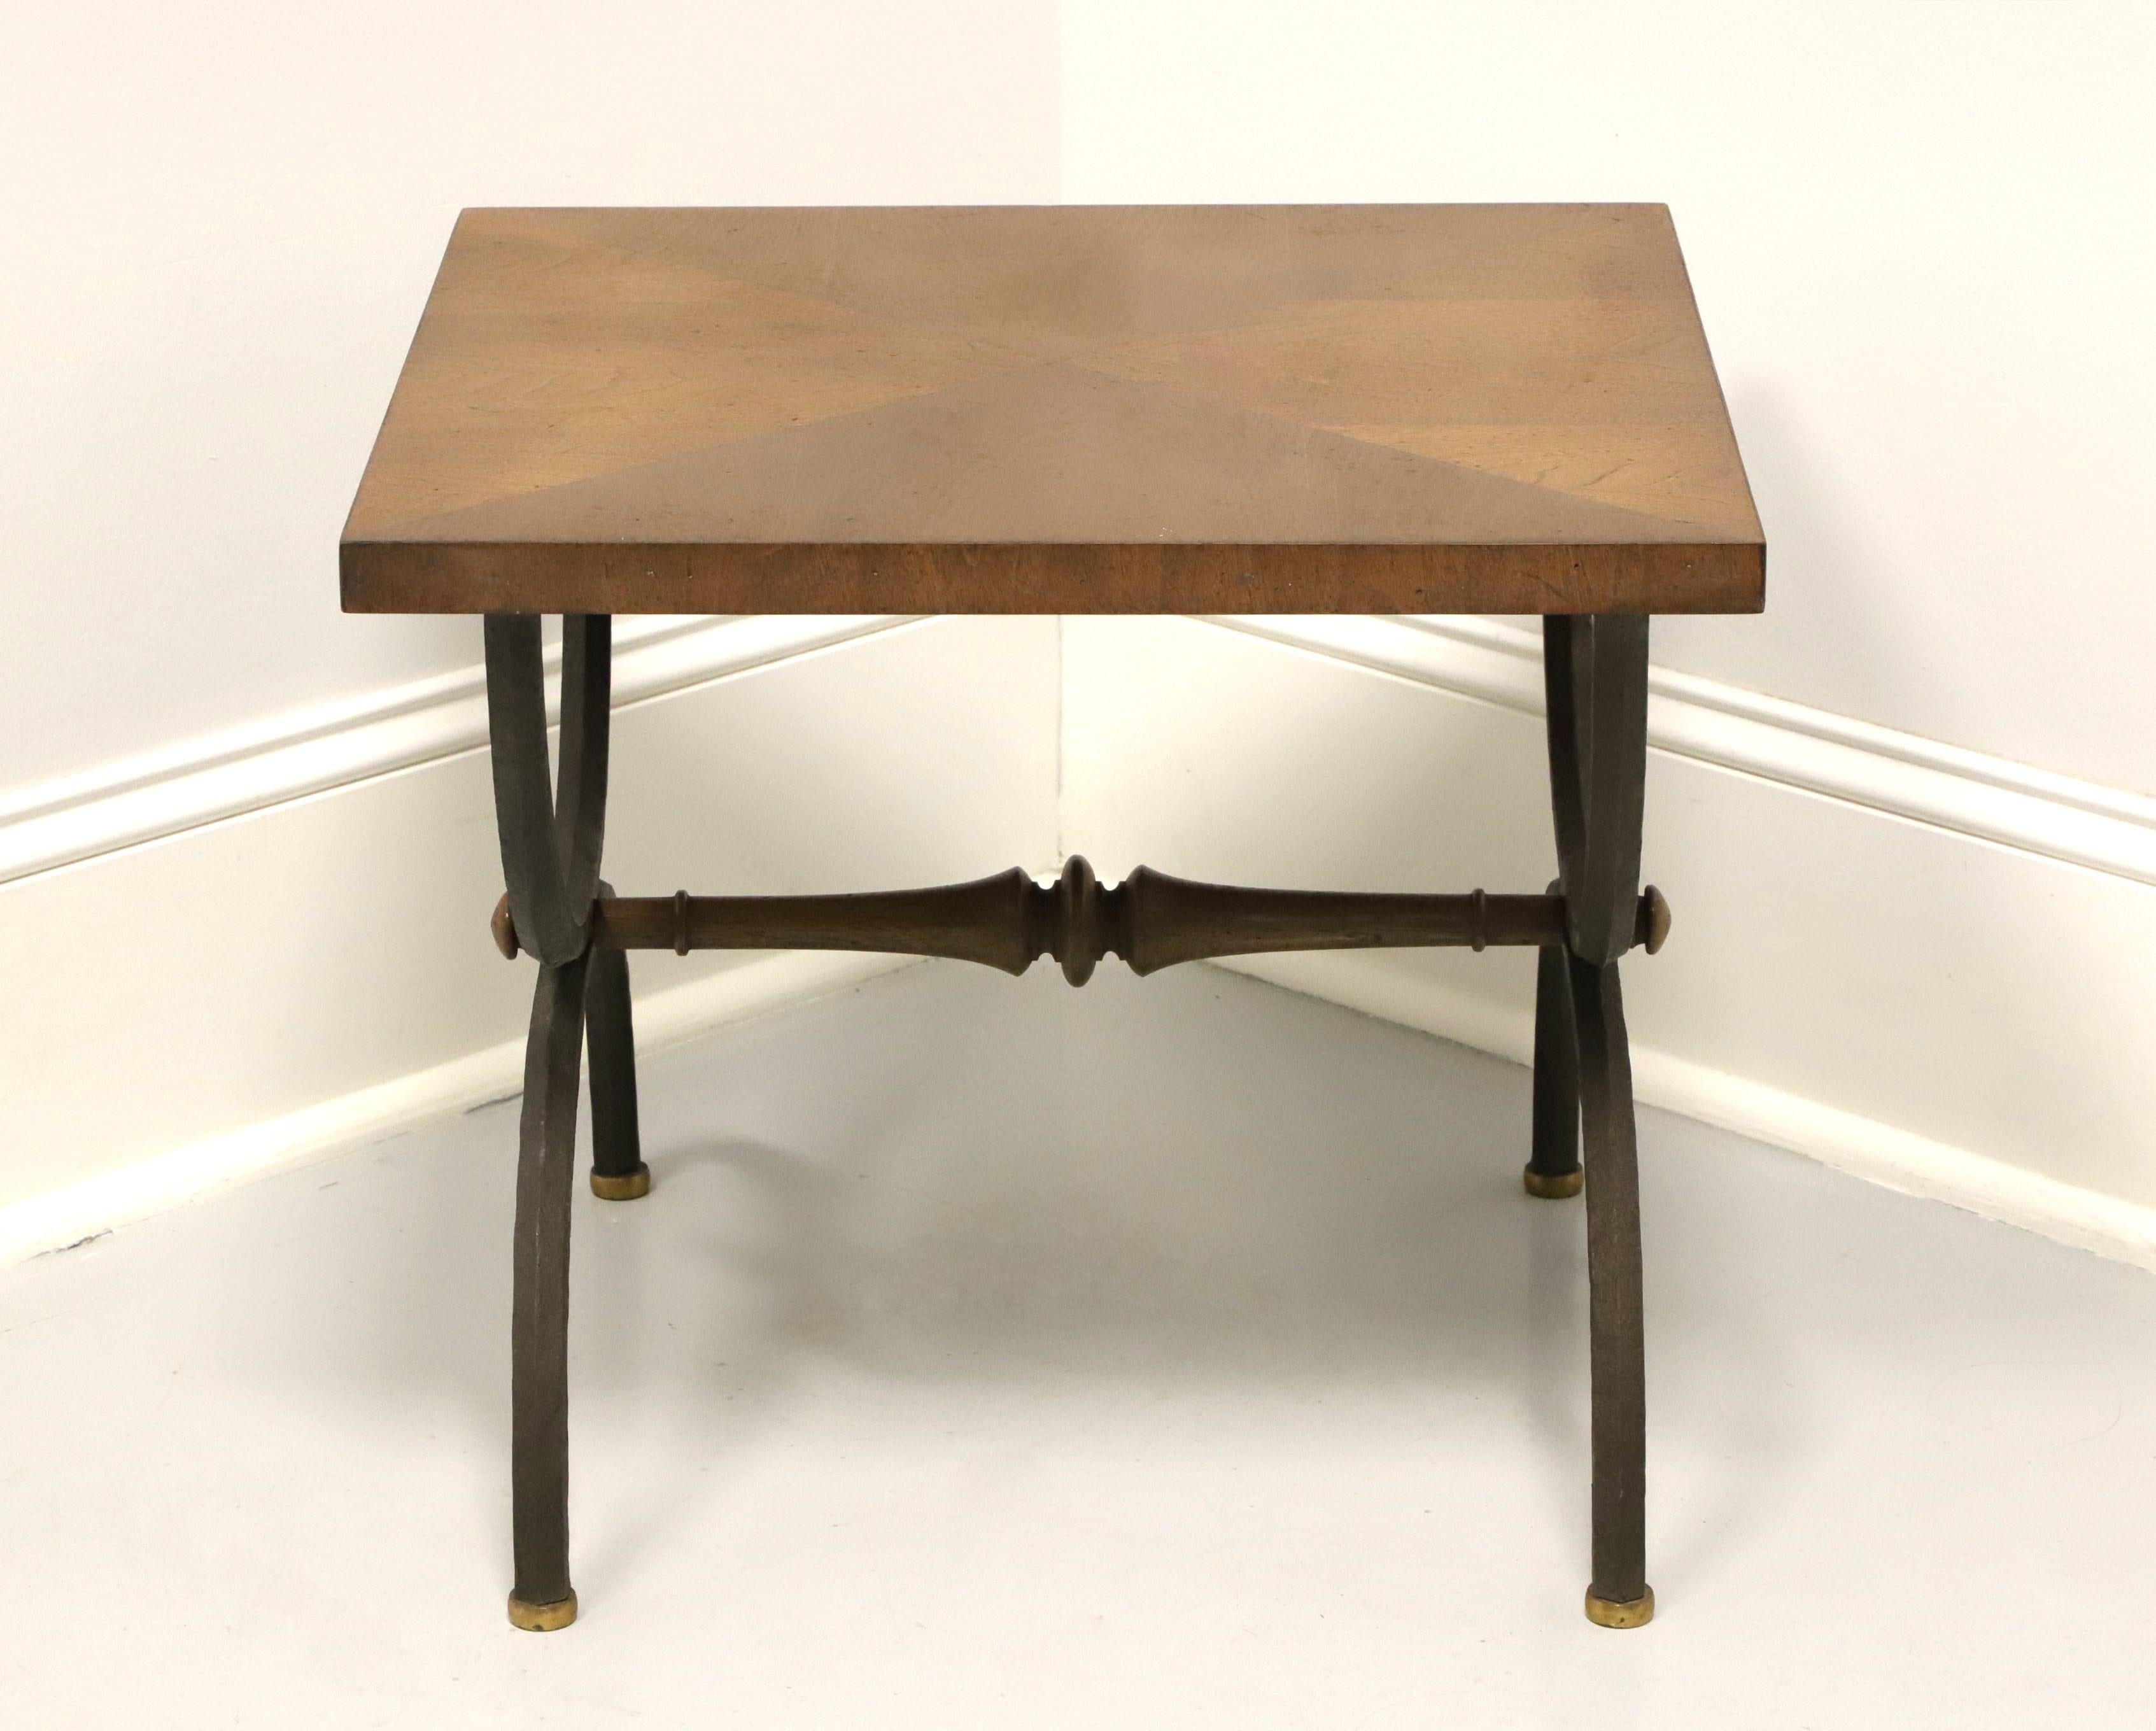 American TOMLINSON 1960's Walnut Square Cocktail Table with Metal Legs - B For Sale